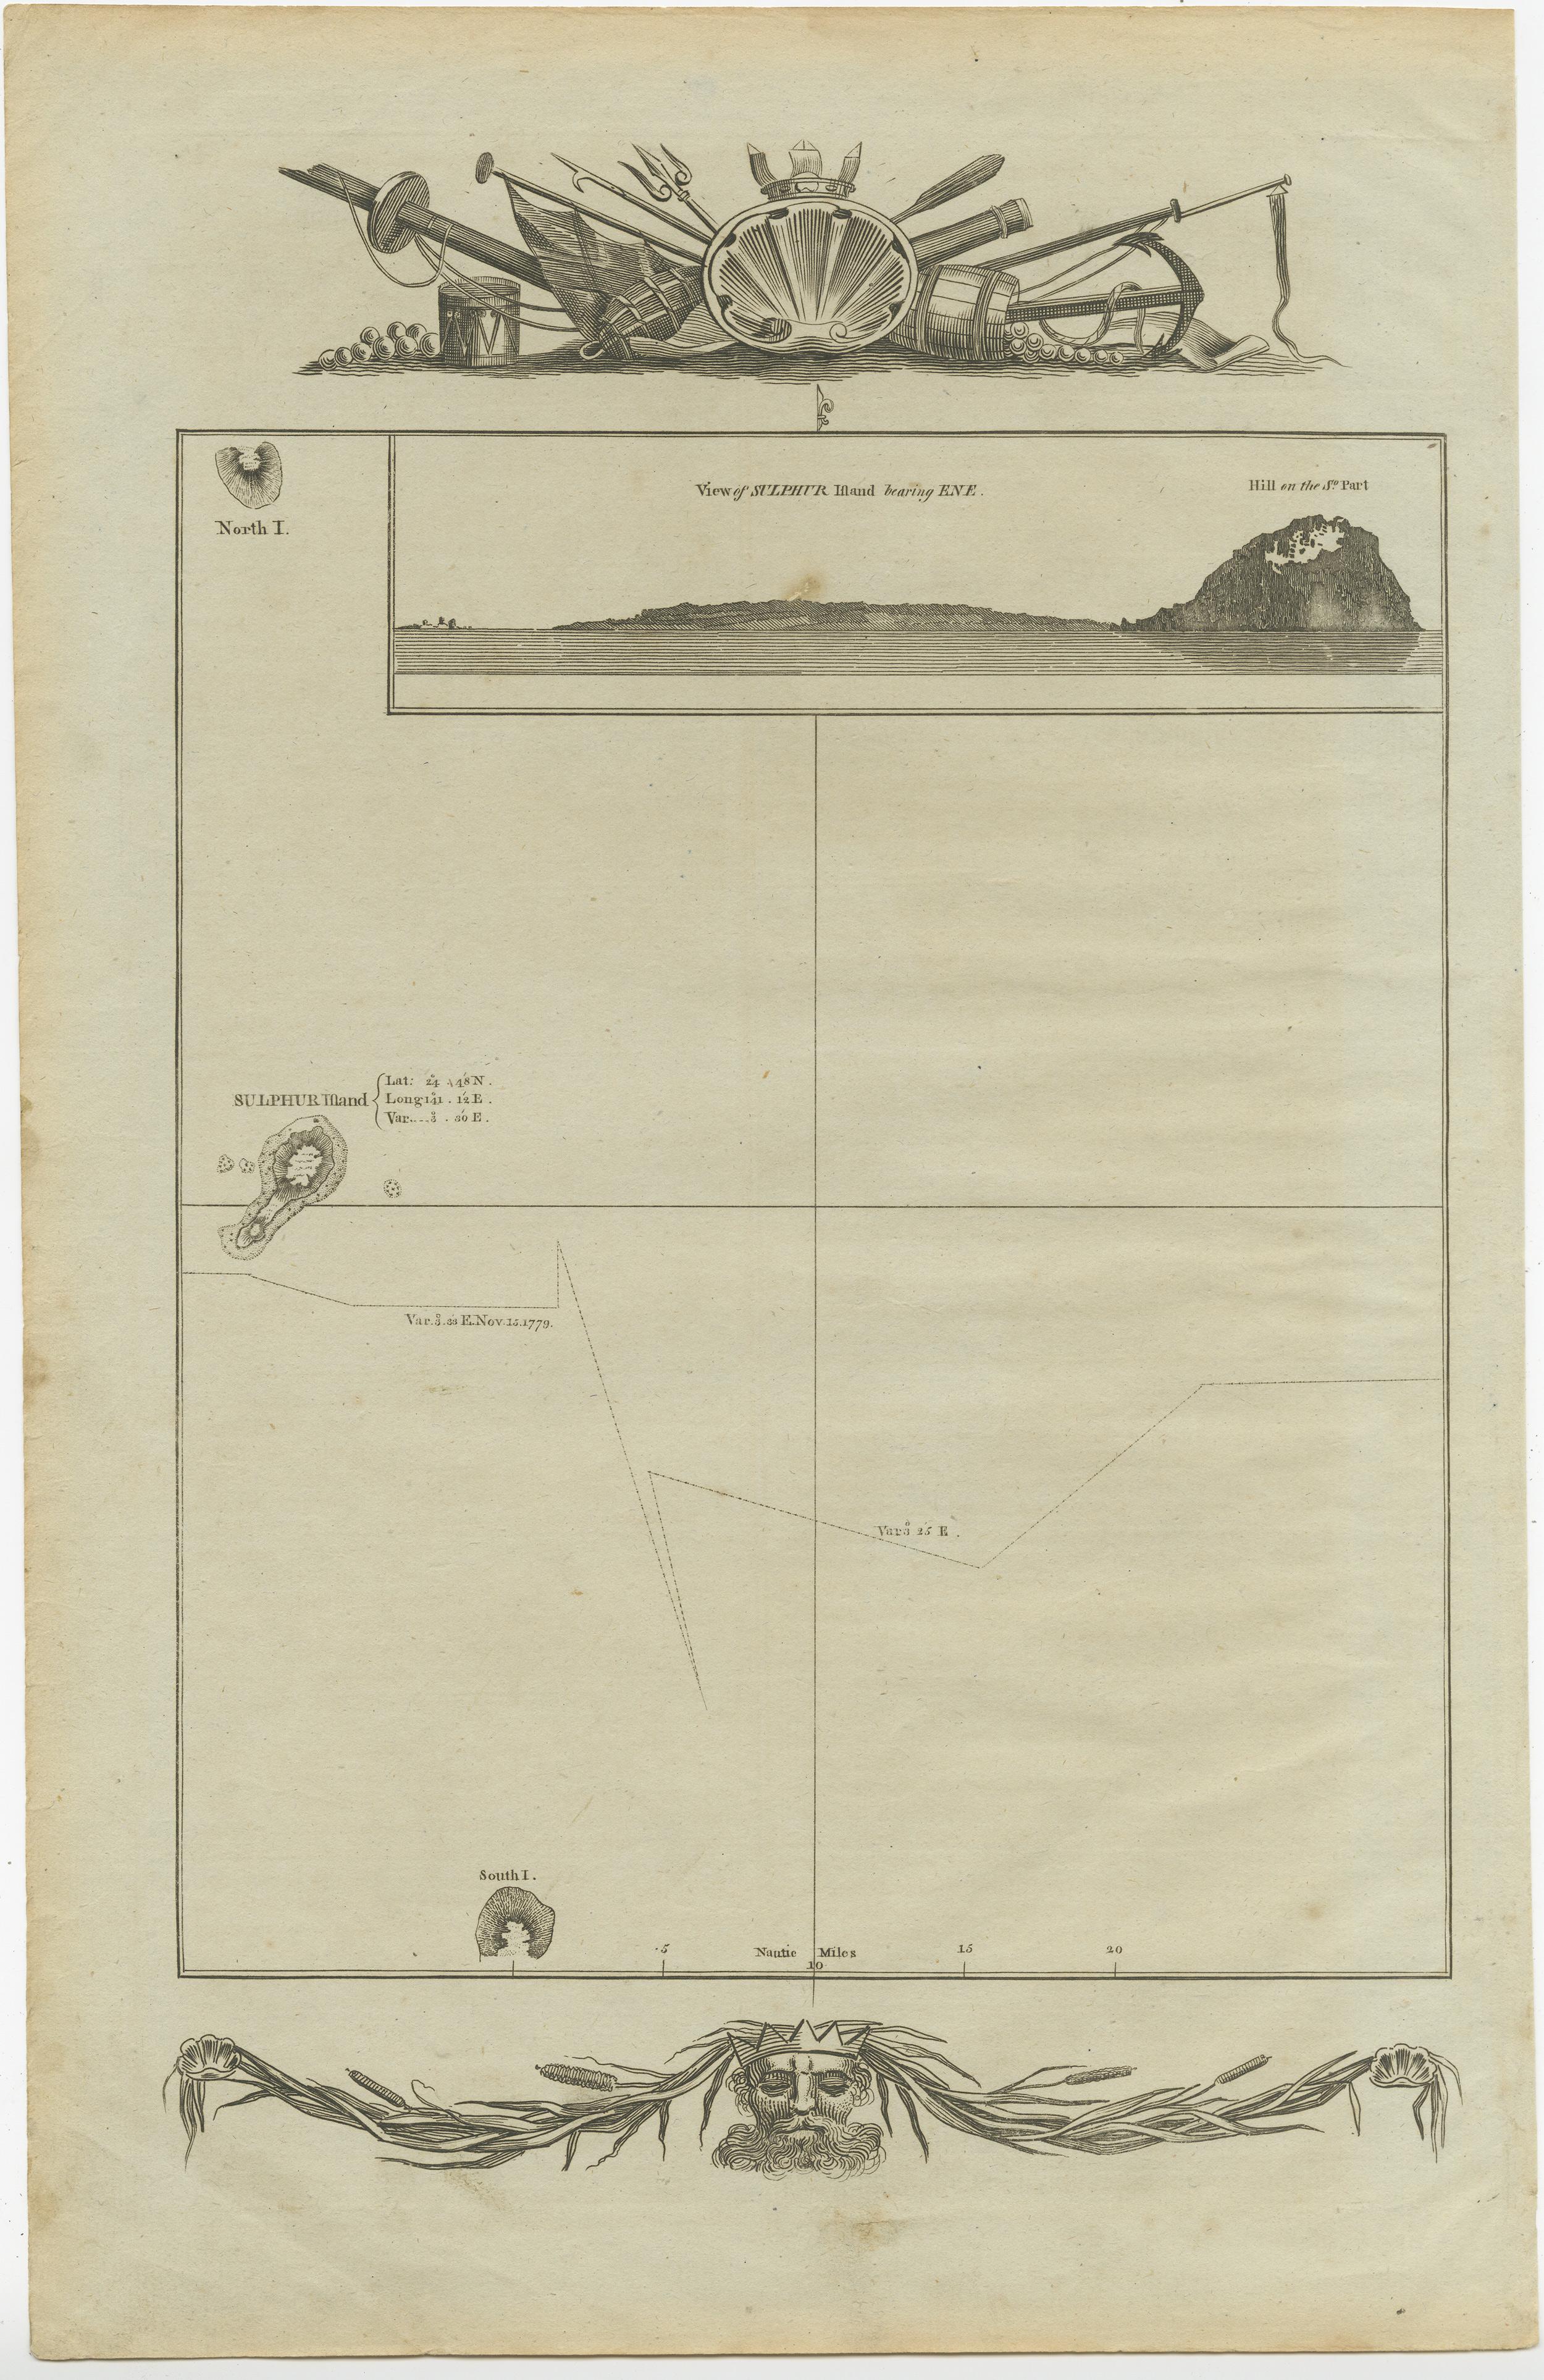 Untitled Antique Map of the islands of Iwo Jima and Sulfur, with a view of Sulphur with the hill. This map originates from 'A new, authentic, and complete collection of voyages round the world : undertaken and performed by royal authority :